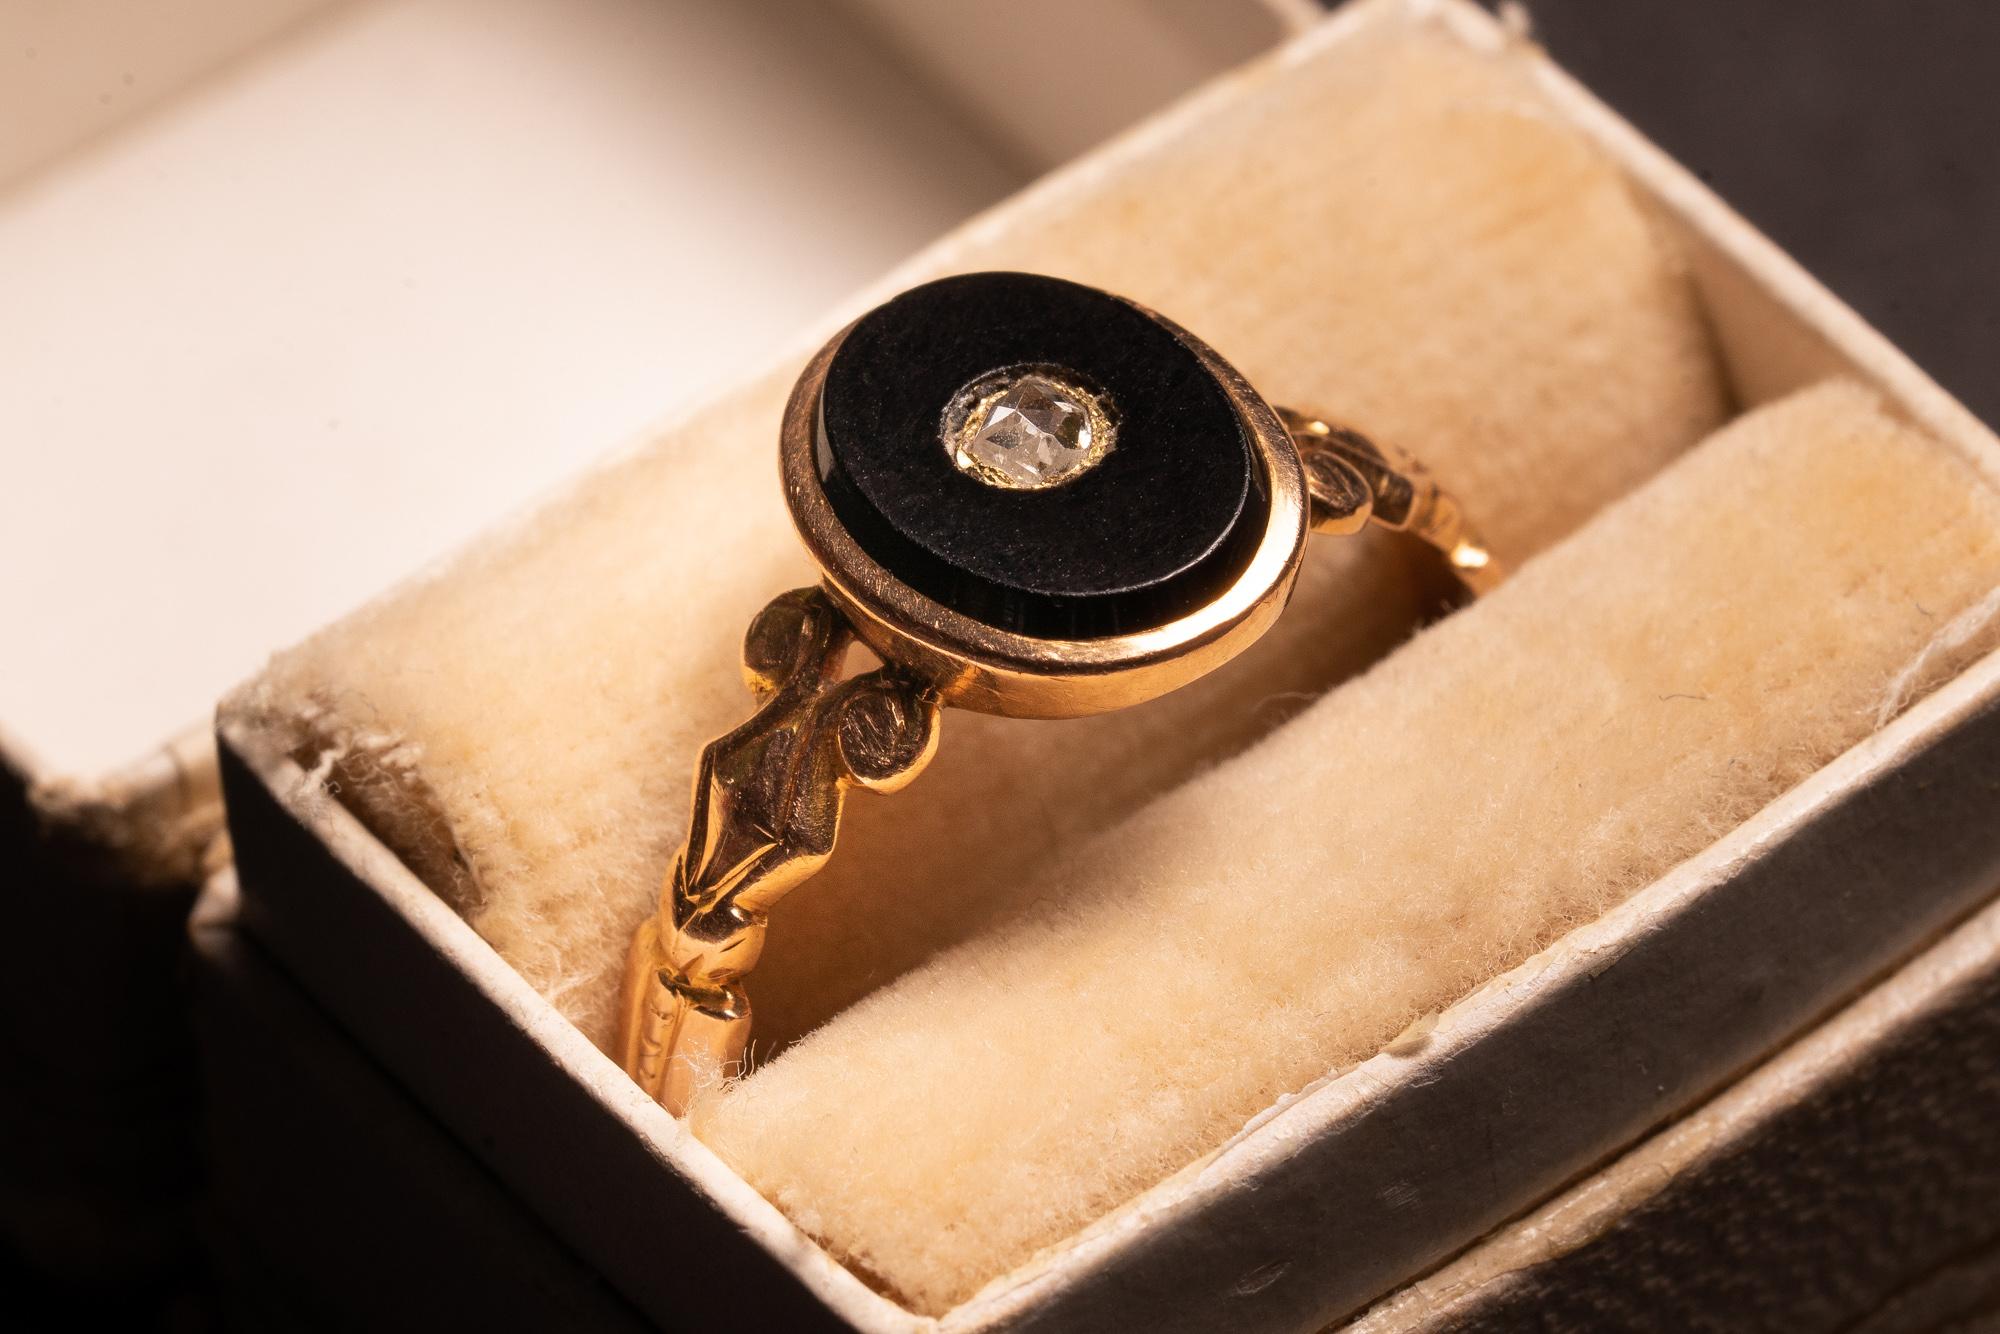 A stunning antique French Onyx ring dating to the mid/late 1800's. This beautiful ring is preserved in a superb state and comes from the North of France. The ring is made of solid 18ct gold and is hallmarked accordingly with an 